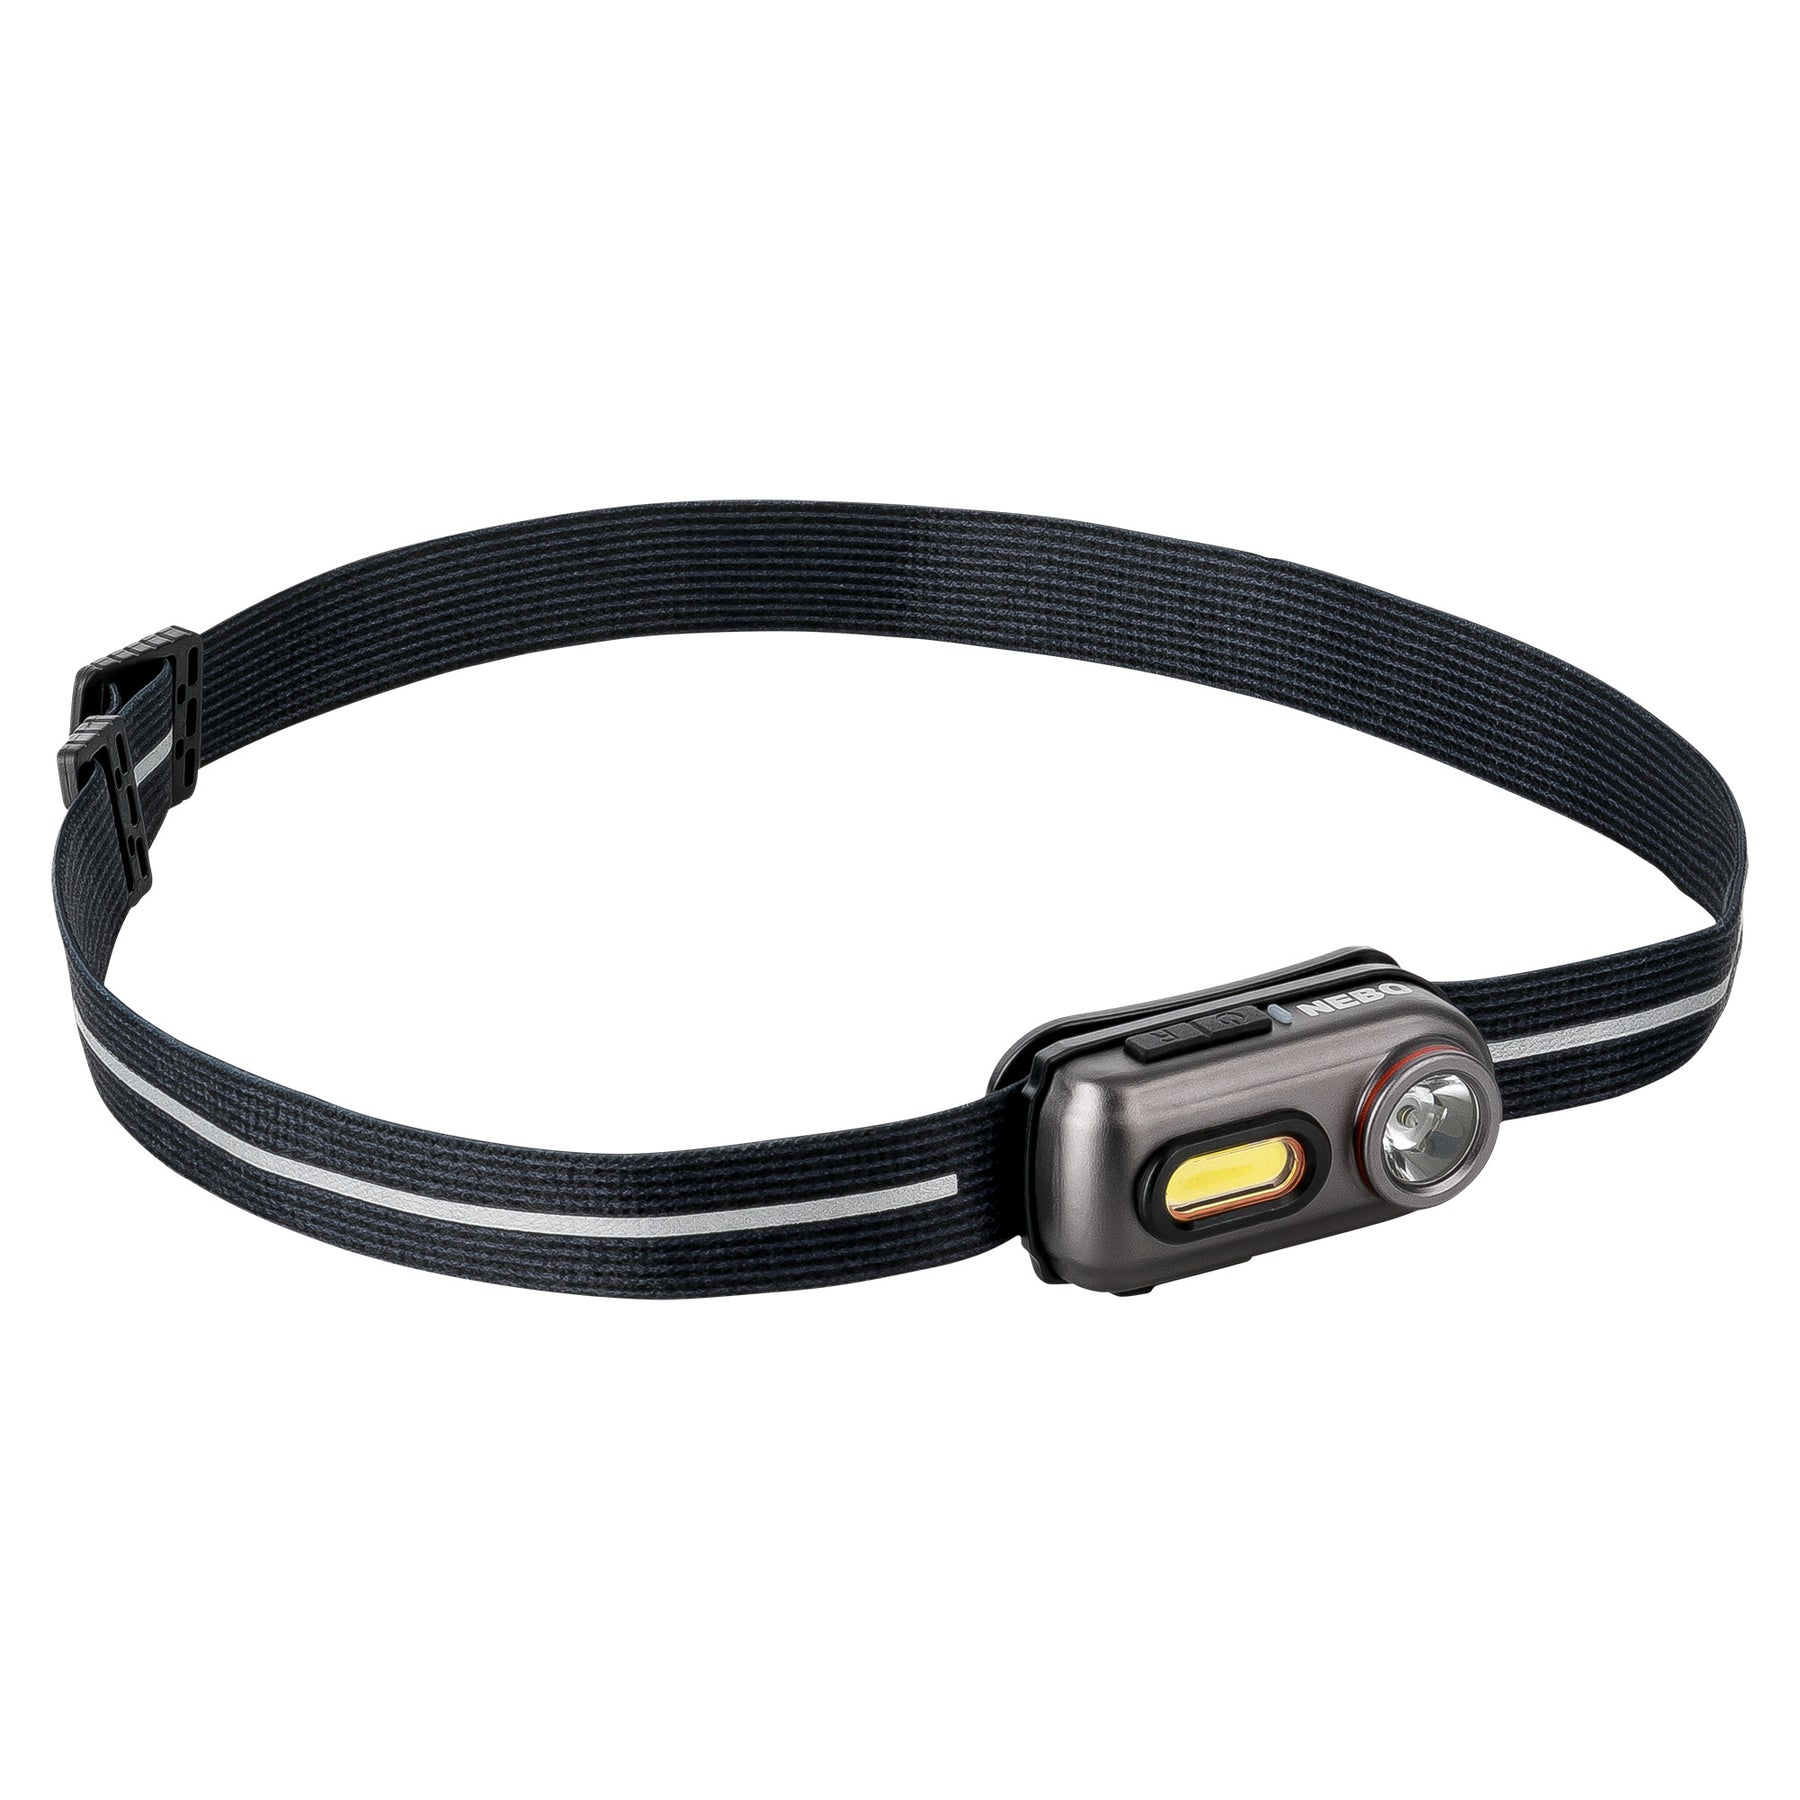 Nebo Einstein 400 Rechargeable Headlamp | Nebo | Portwest - The Outdoor Shop